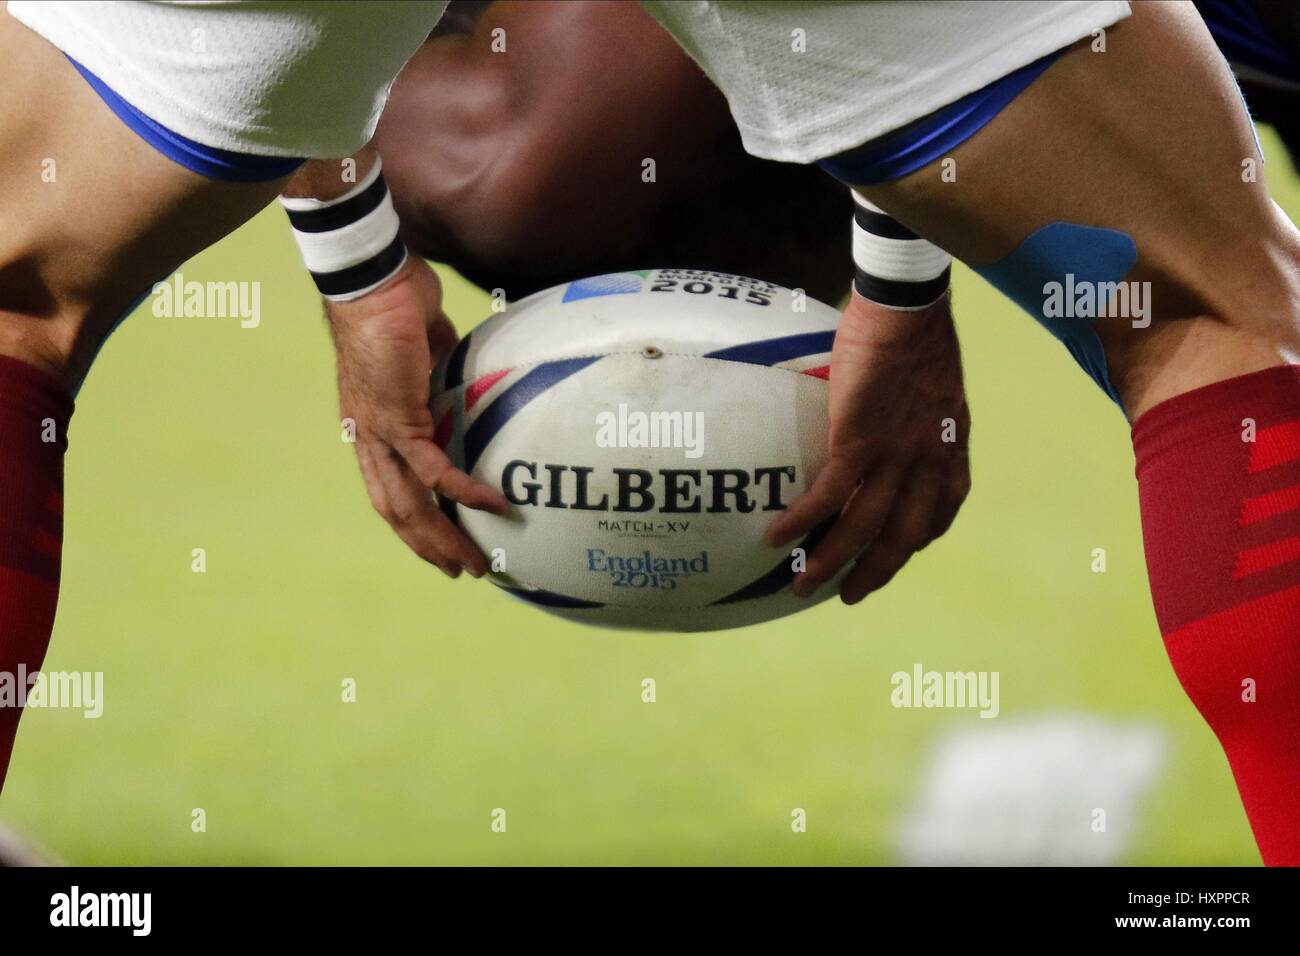 GILBERT Rugby Football Rugby World Cup 2015 Coupe du monde de rugby de Twickenham 2015 LONDON ANGLETERRE 19 Septembre 2015 Banque D'Images